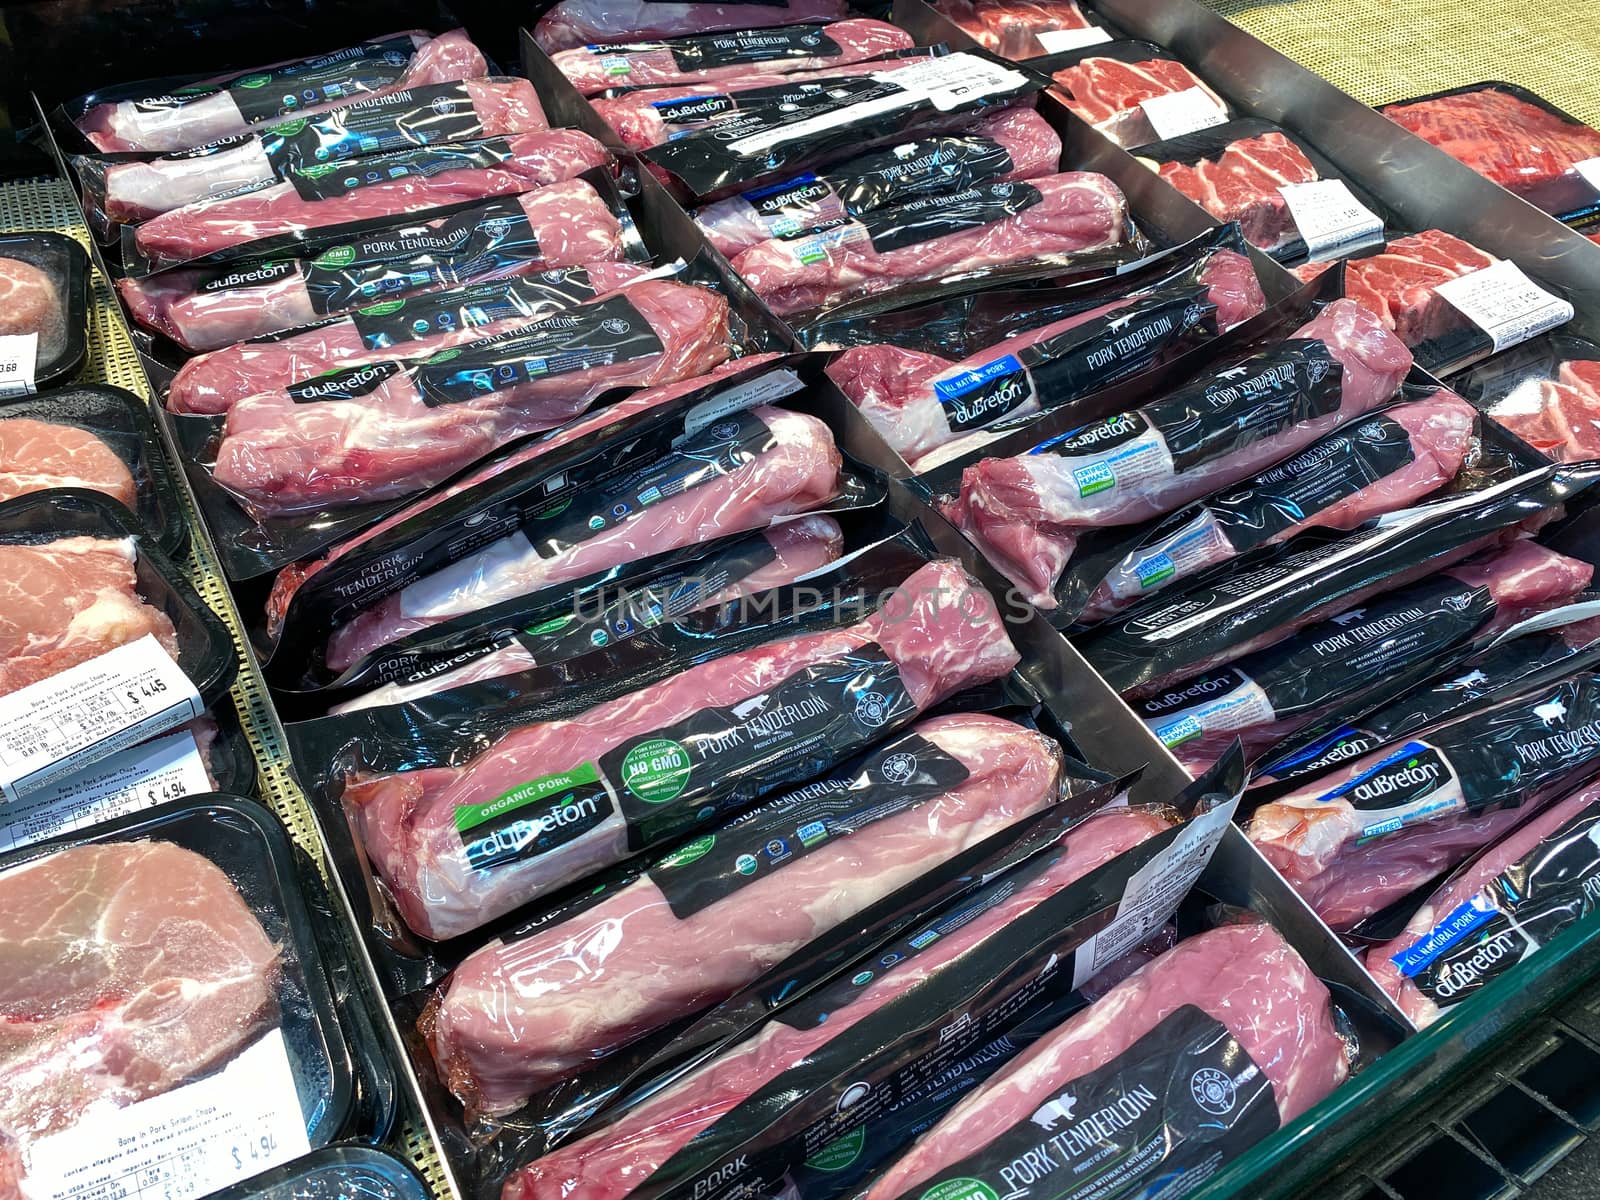 Orlando,FL/USA -5/10/20:  A refrigerated case of packaged pork tenderloin ready for customers to purchase at a Whole Foods Market grocery store.